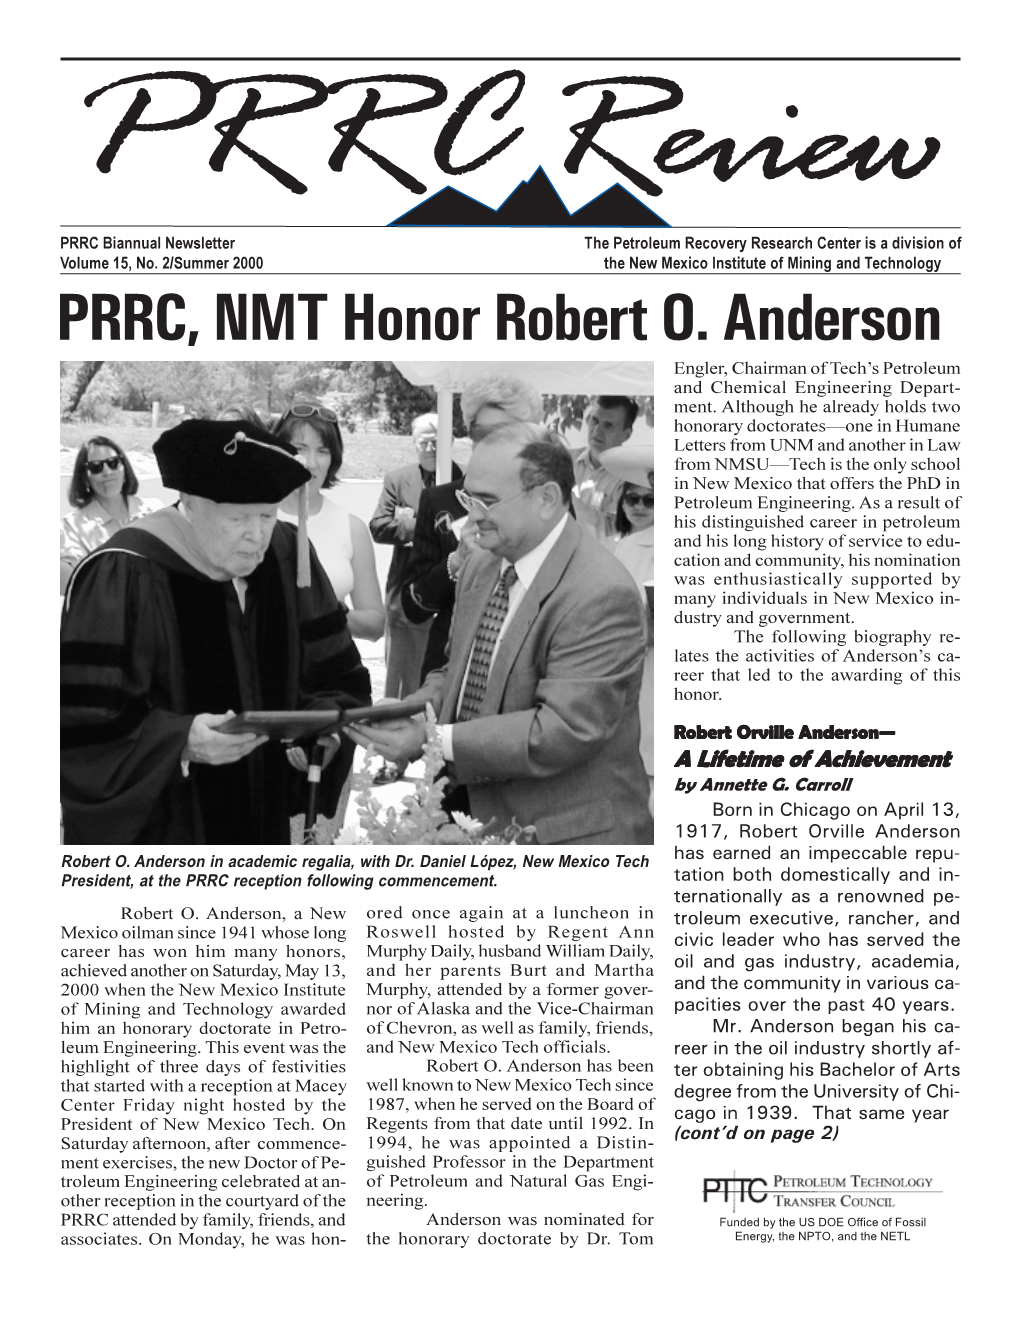 PRRC, NMT Honor Robert O. Anderson Engler, Chairman of Tech’S Petroleum and Chemical Engineering Depart- Ment